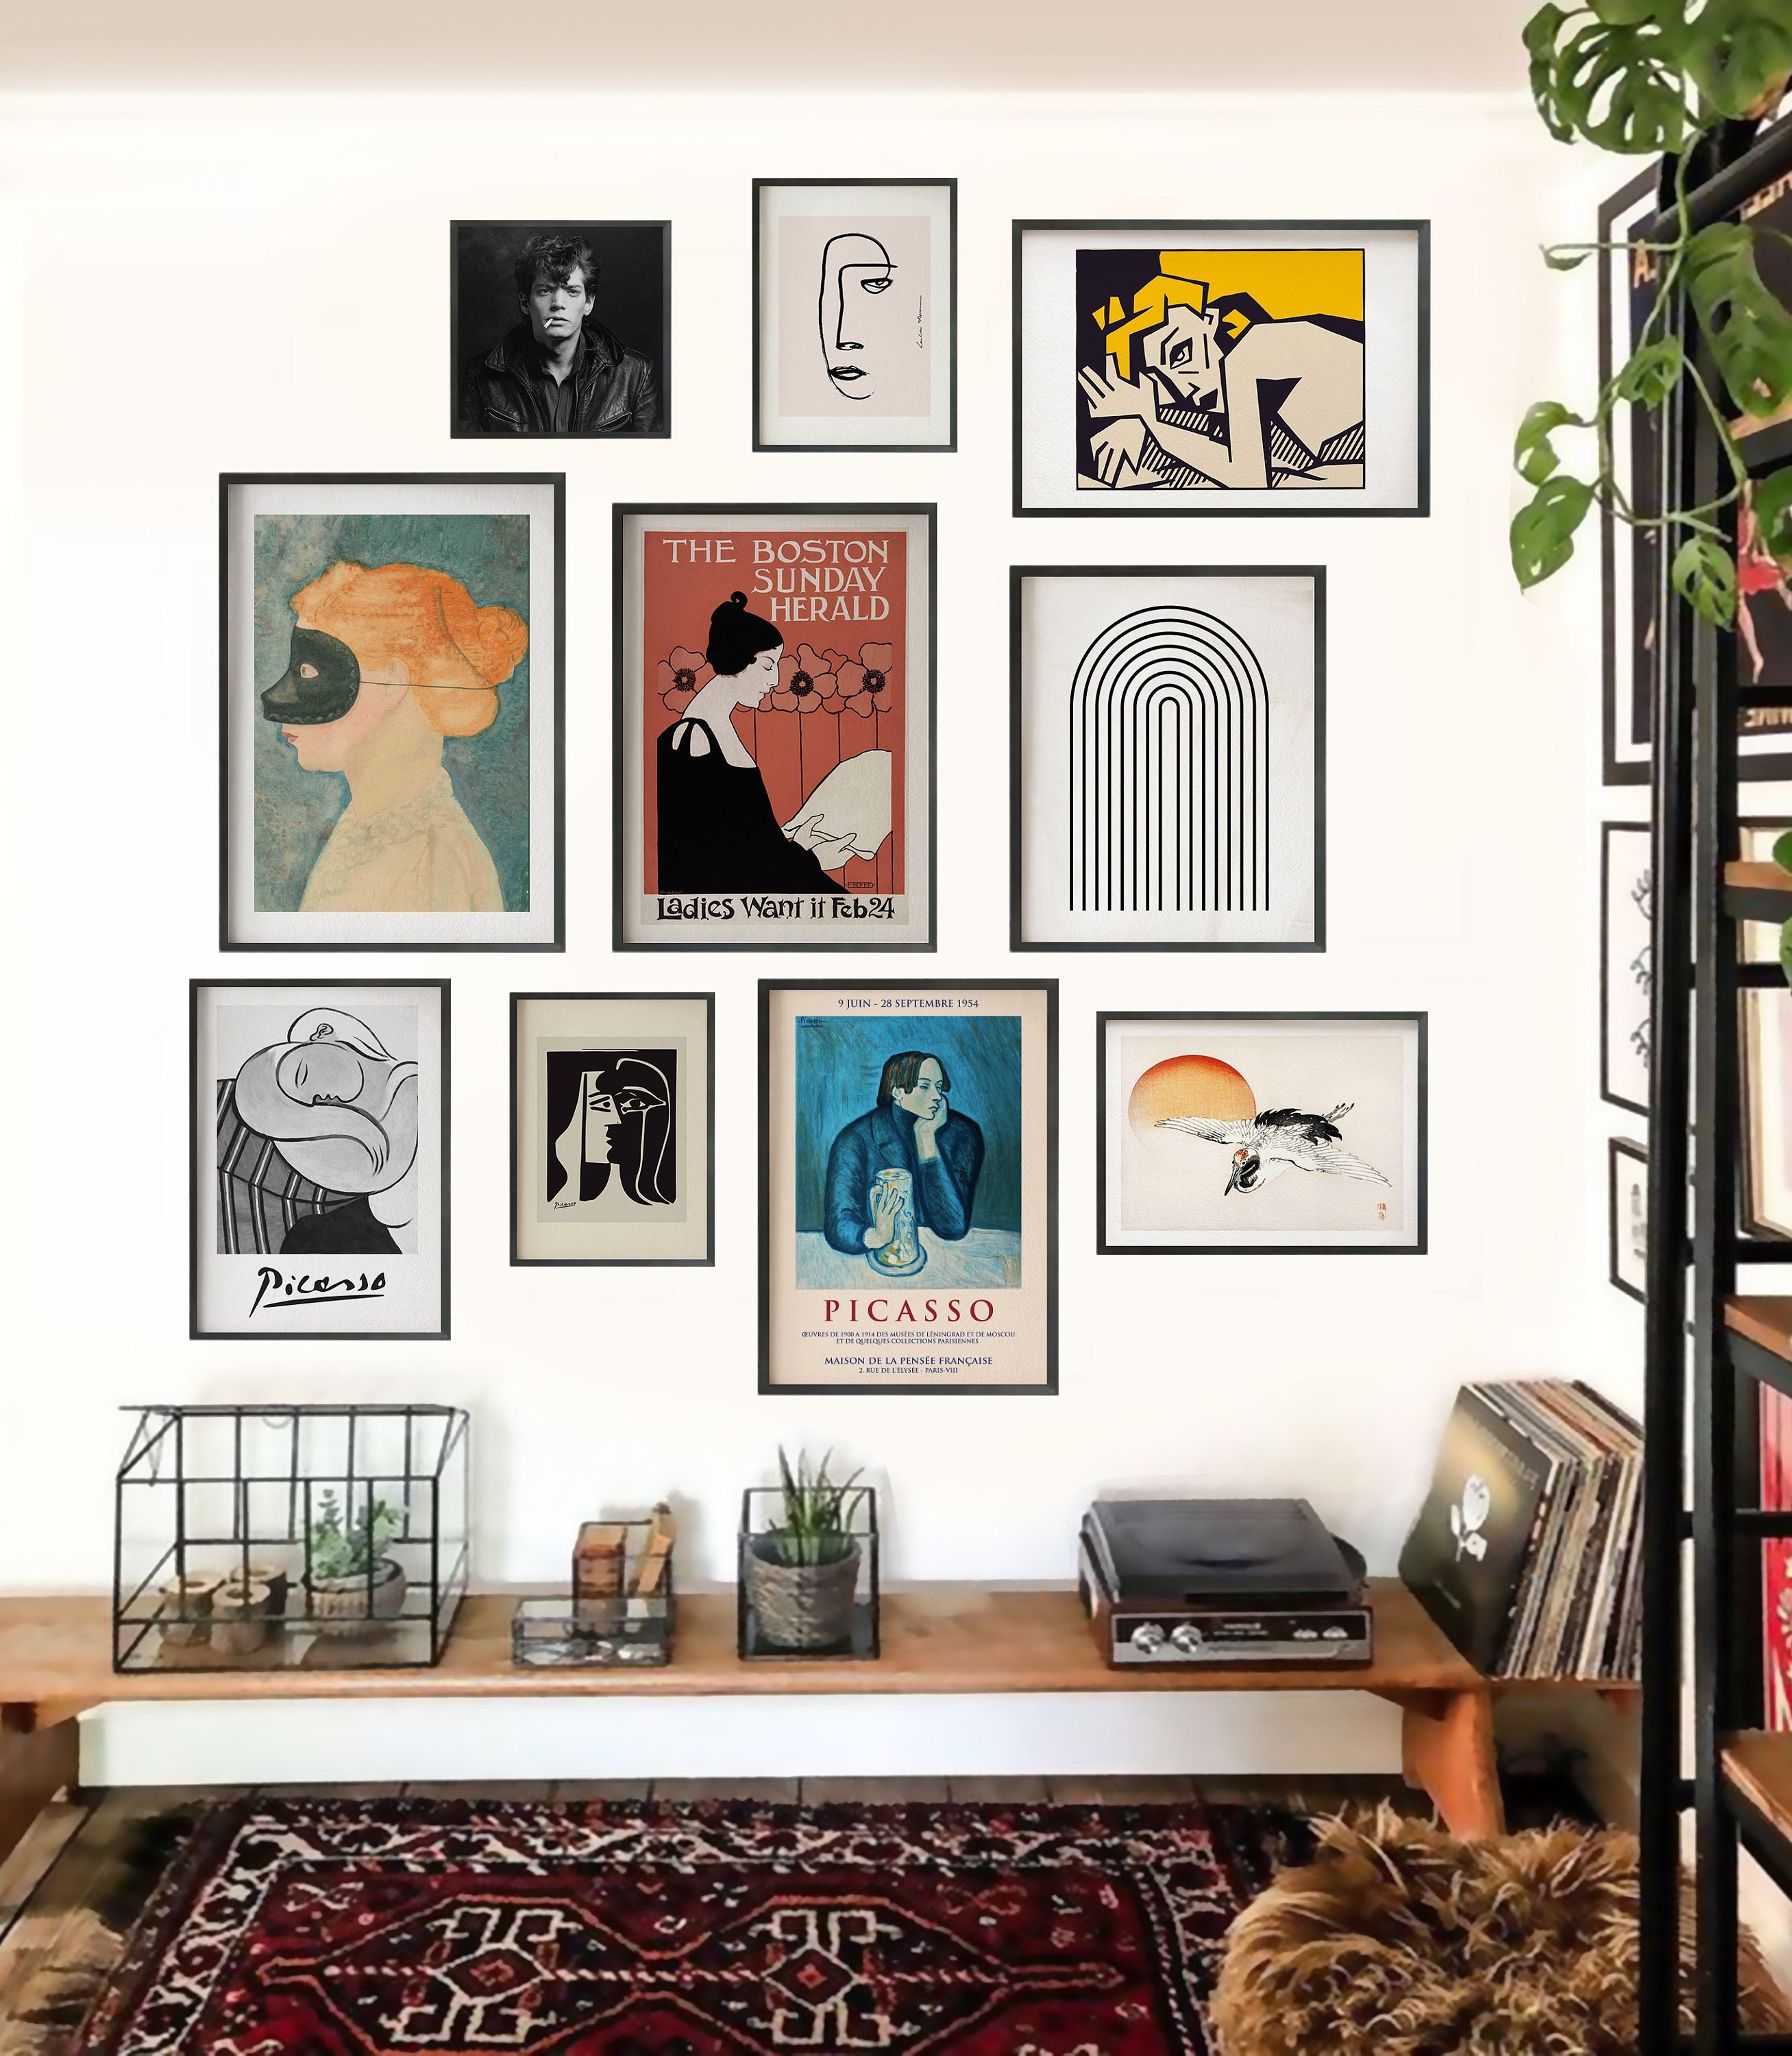 Gallery Wall Art Set of 10, Eclectic Print Set, Wall Decor, Wall Prints  Bundle, Picasso, Mapplethorpe, Digital Download 